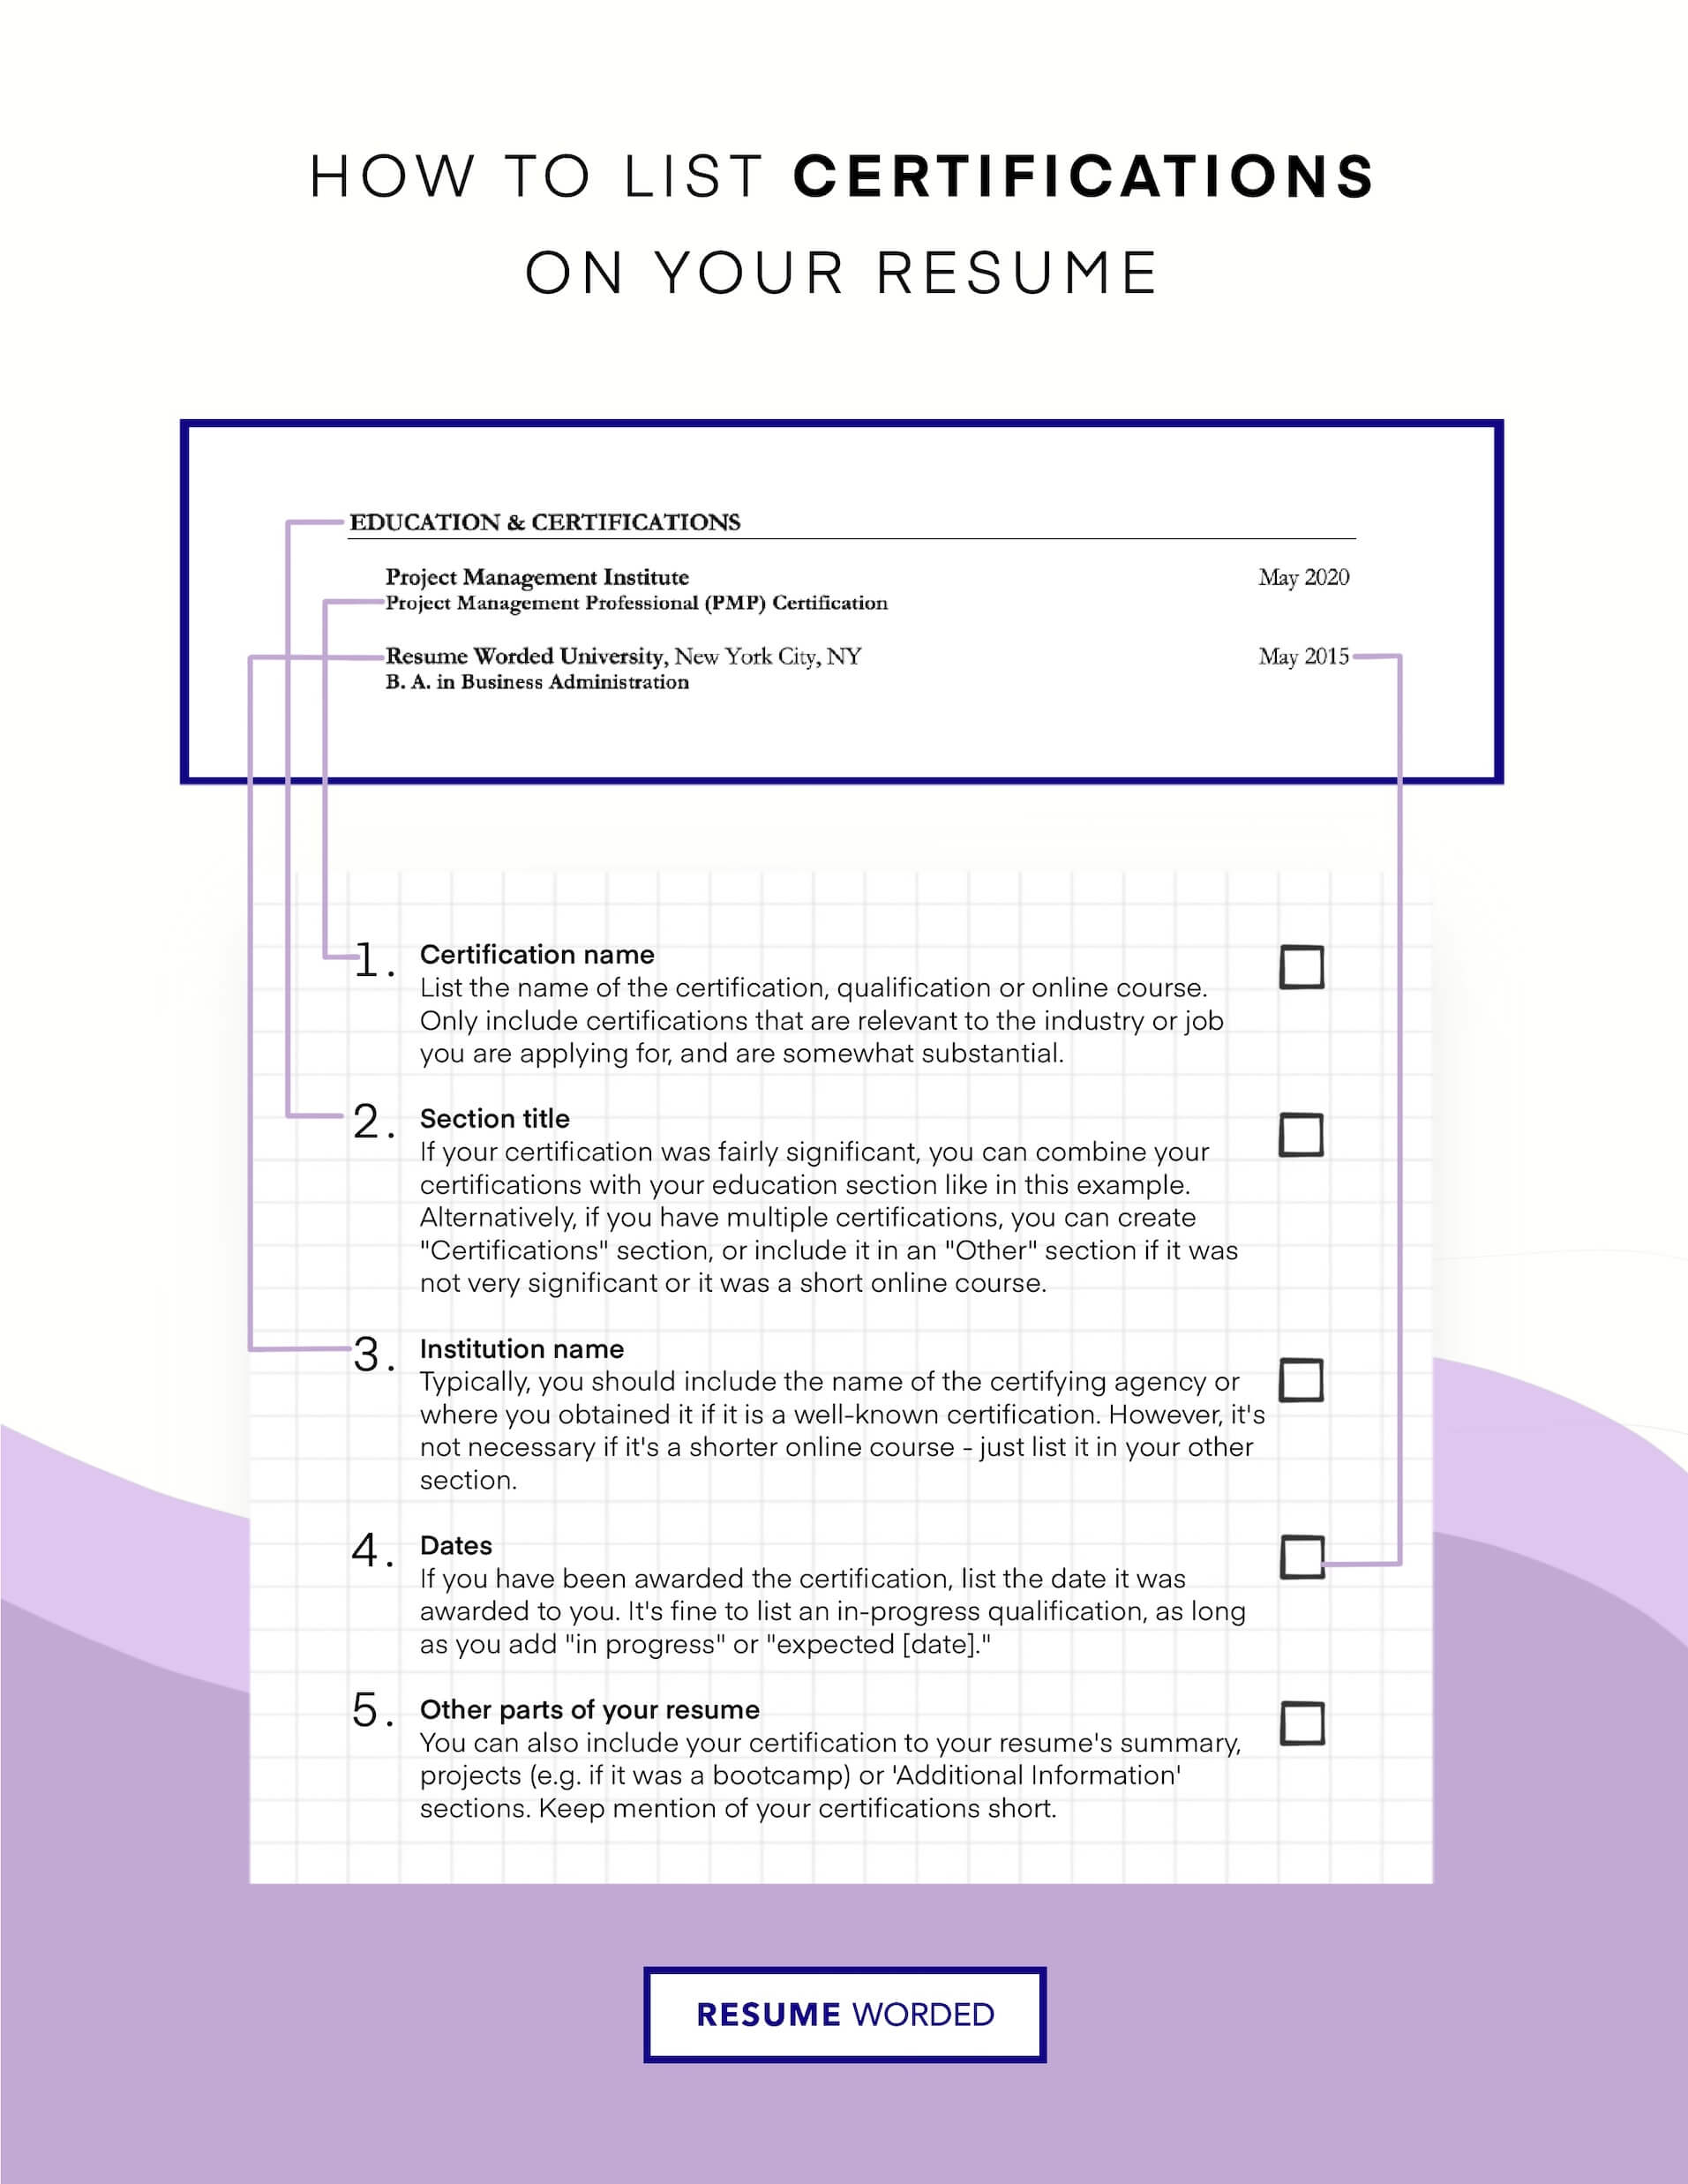 Make the extra effort with your certifications. - Entry-Level Pharmacy Technician Resume